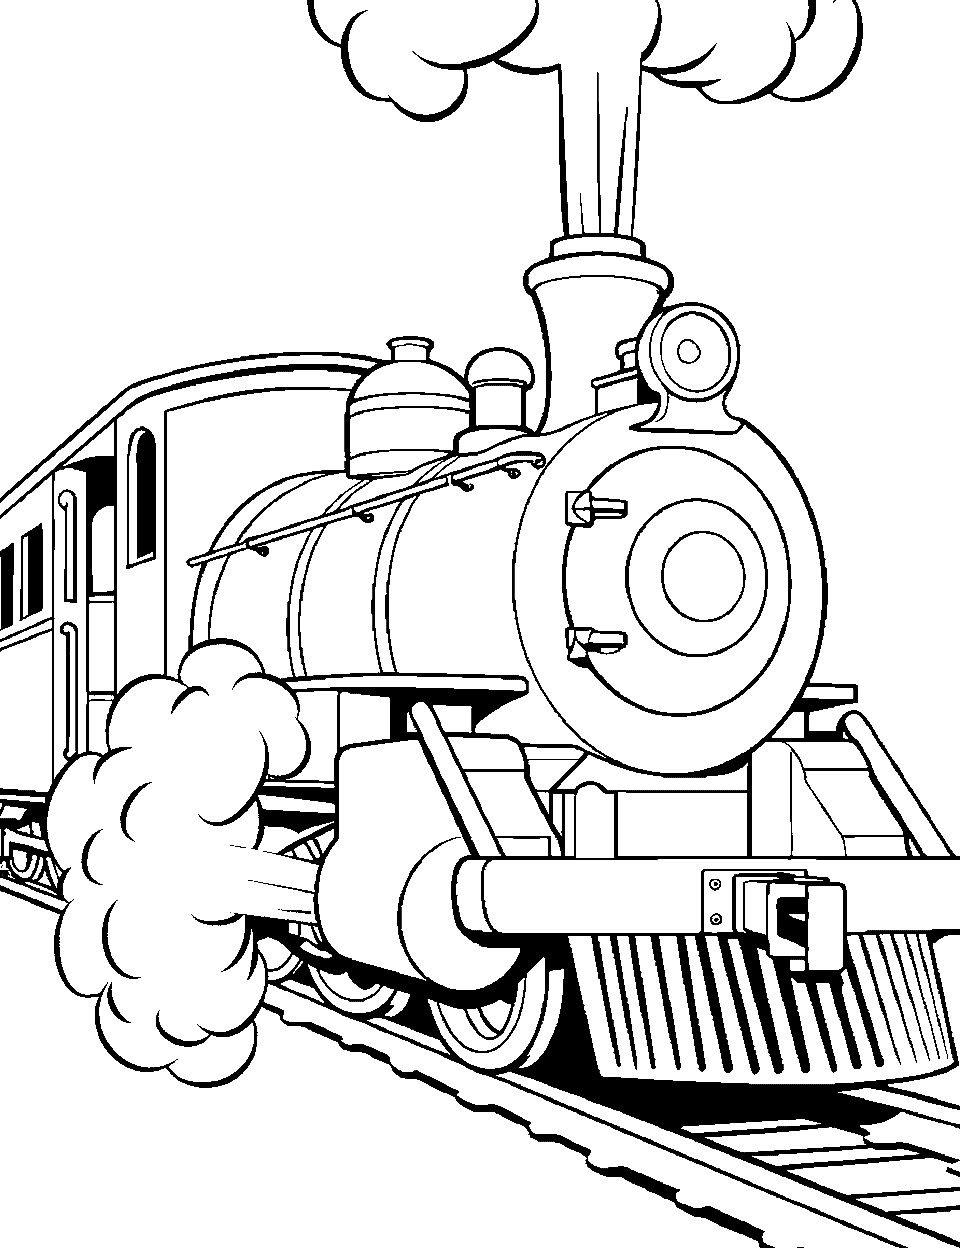 Vintage Steam Locomotive Coloring Page - An old-fashioned steam locomotive chugging smoke.